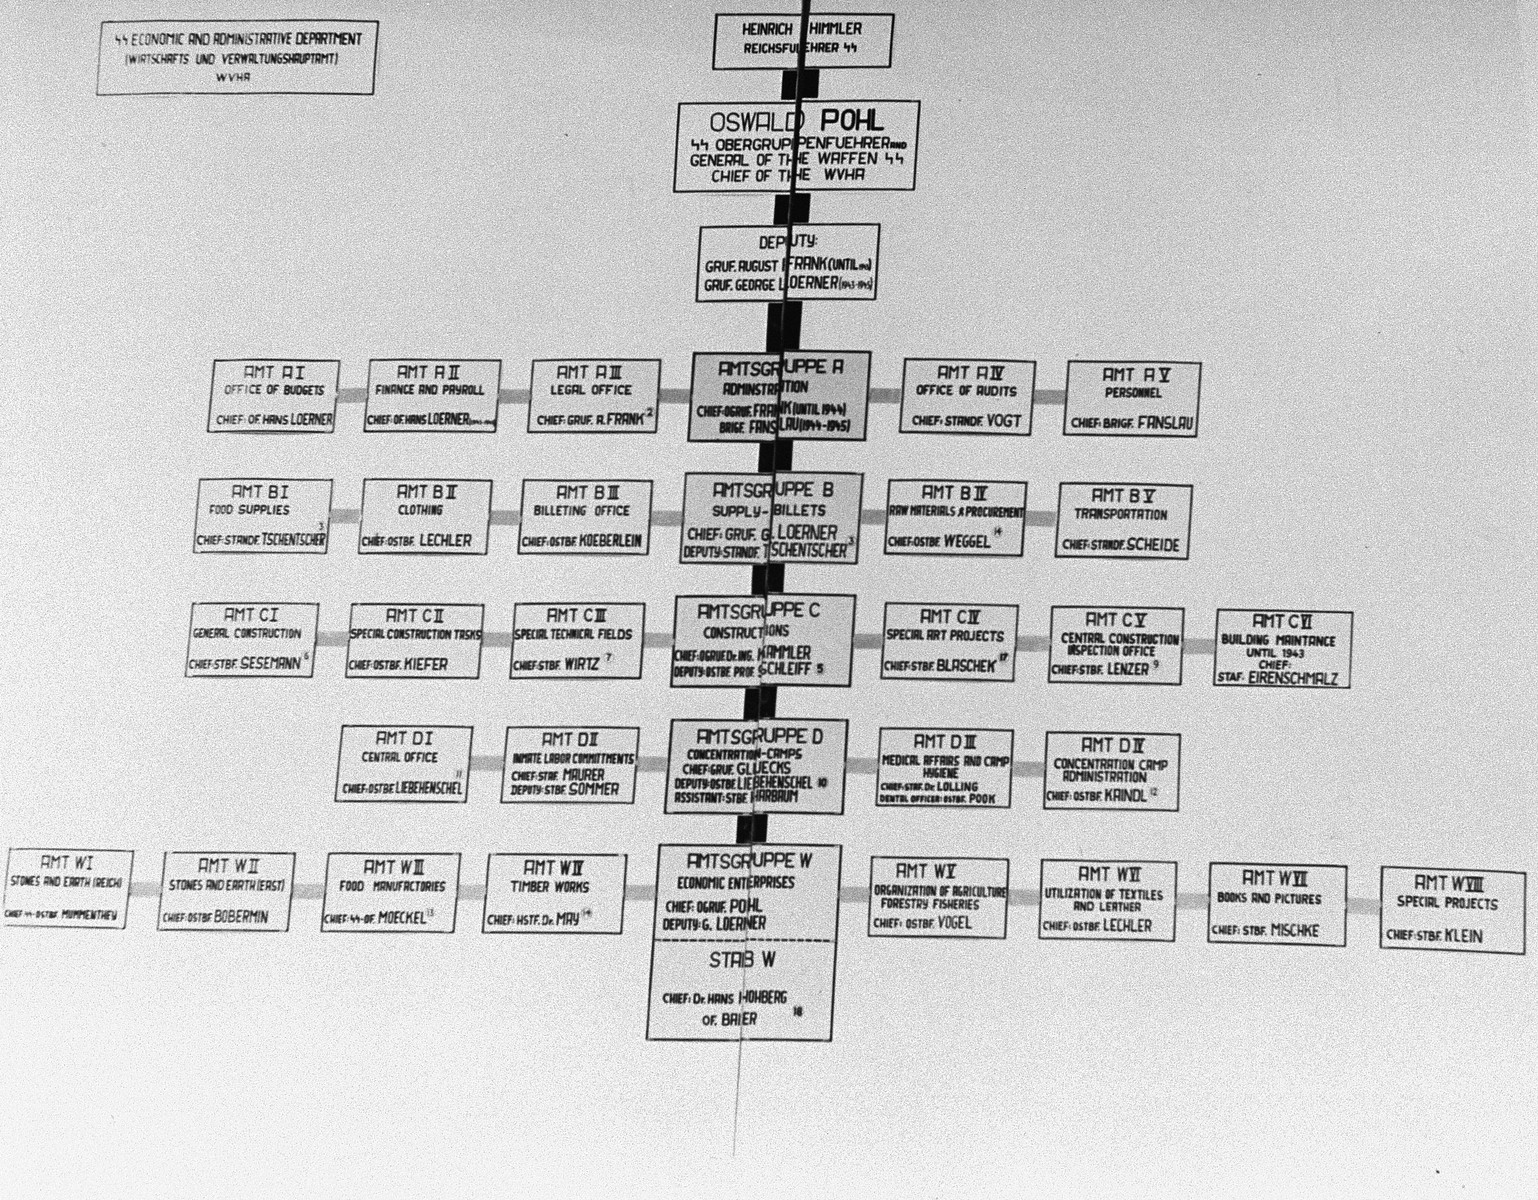 A chart designating the chain of command in the Economic and Administrative Main Office (the WVHA) presented as supporting material by the prosecution during the Pohl/WVHA trial.